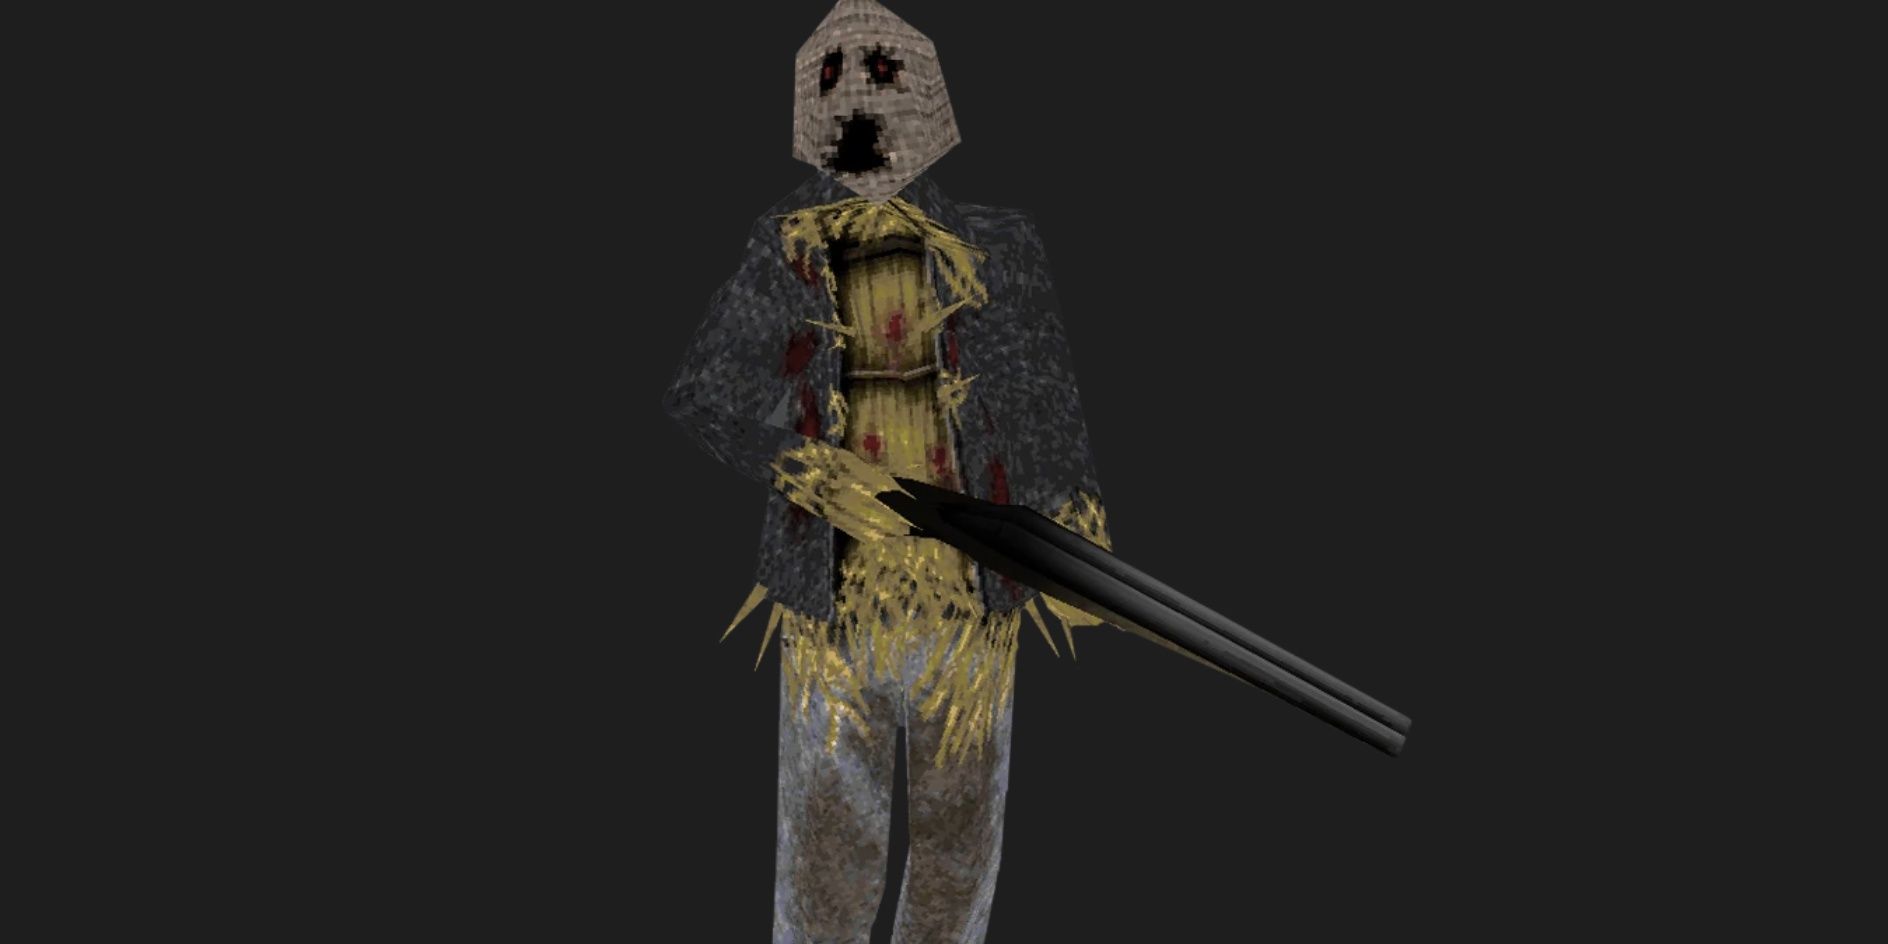 possessed scarecrow enemy in dusk